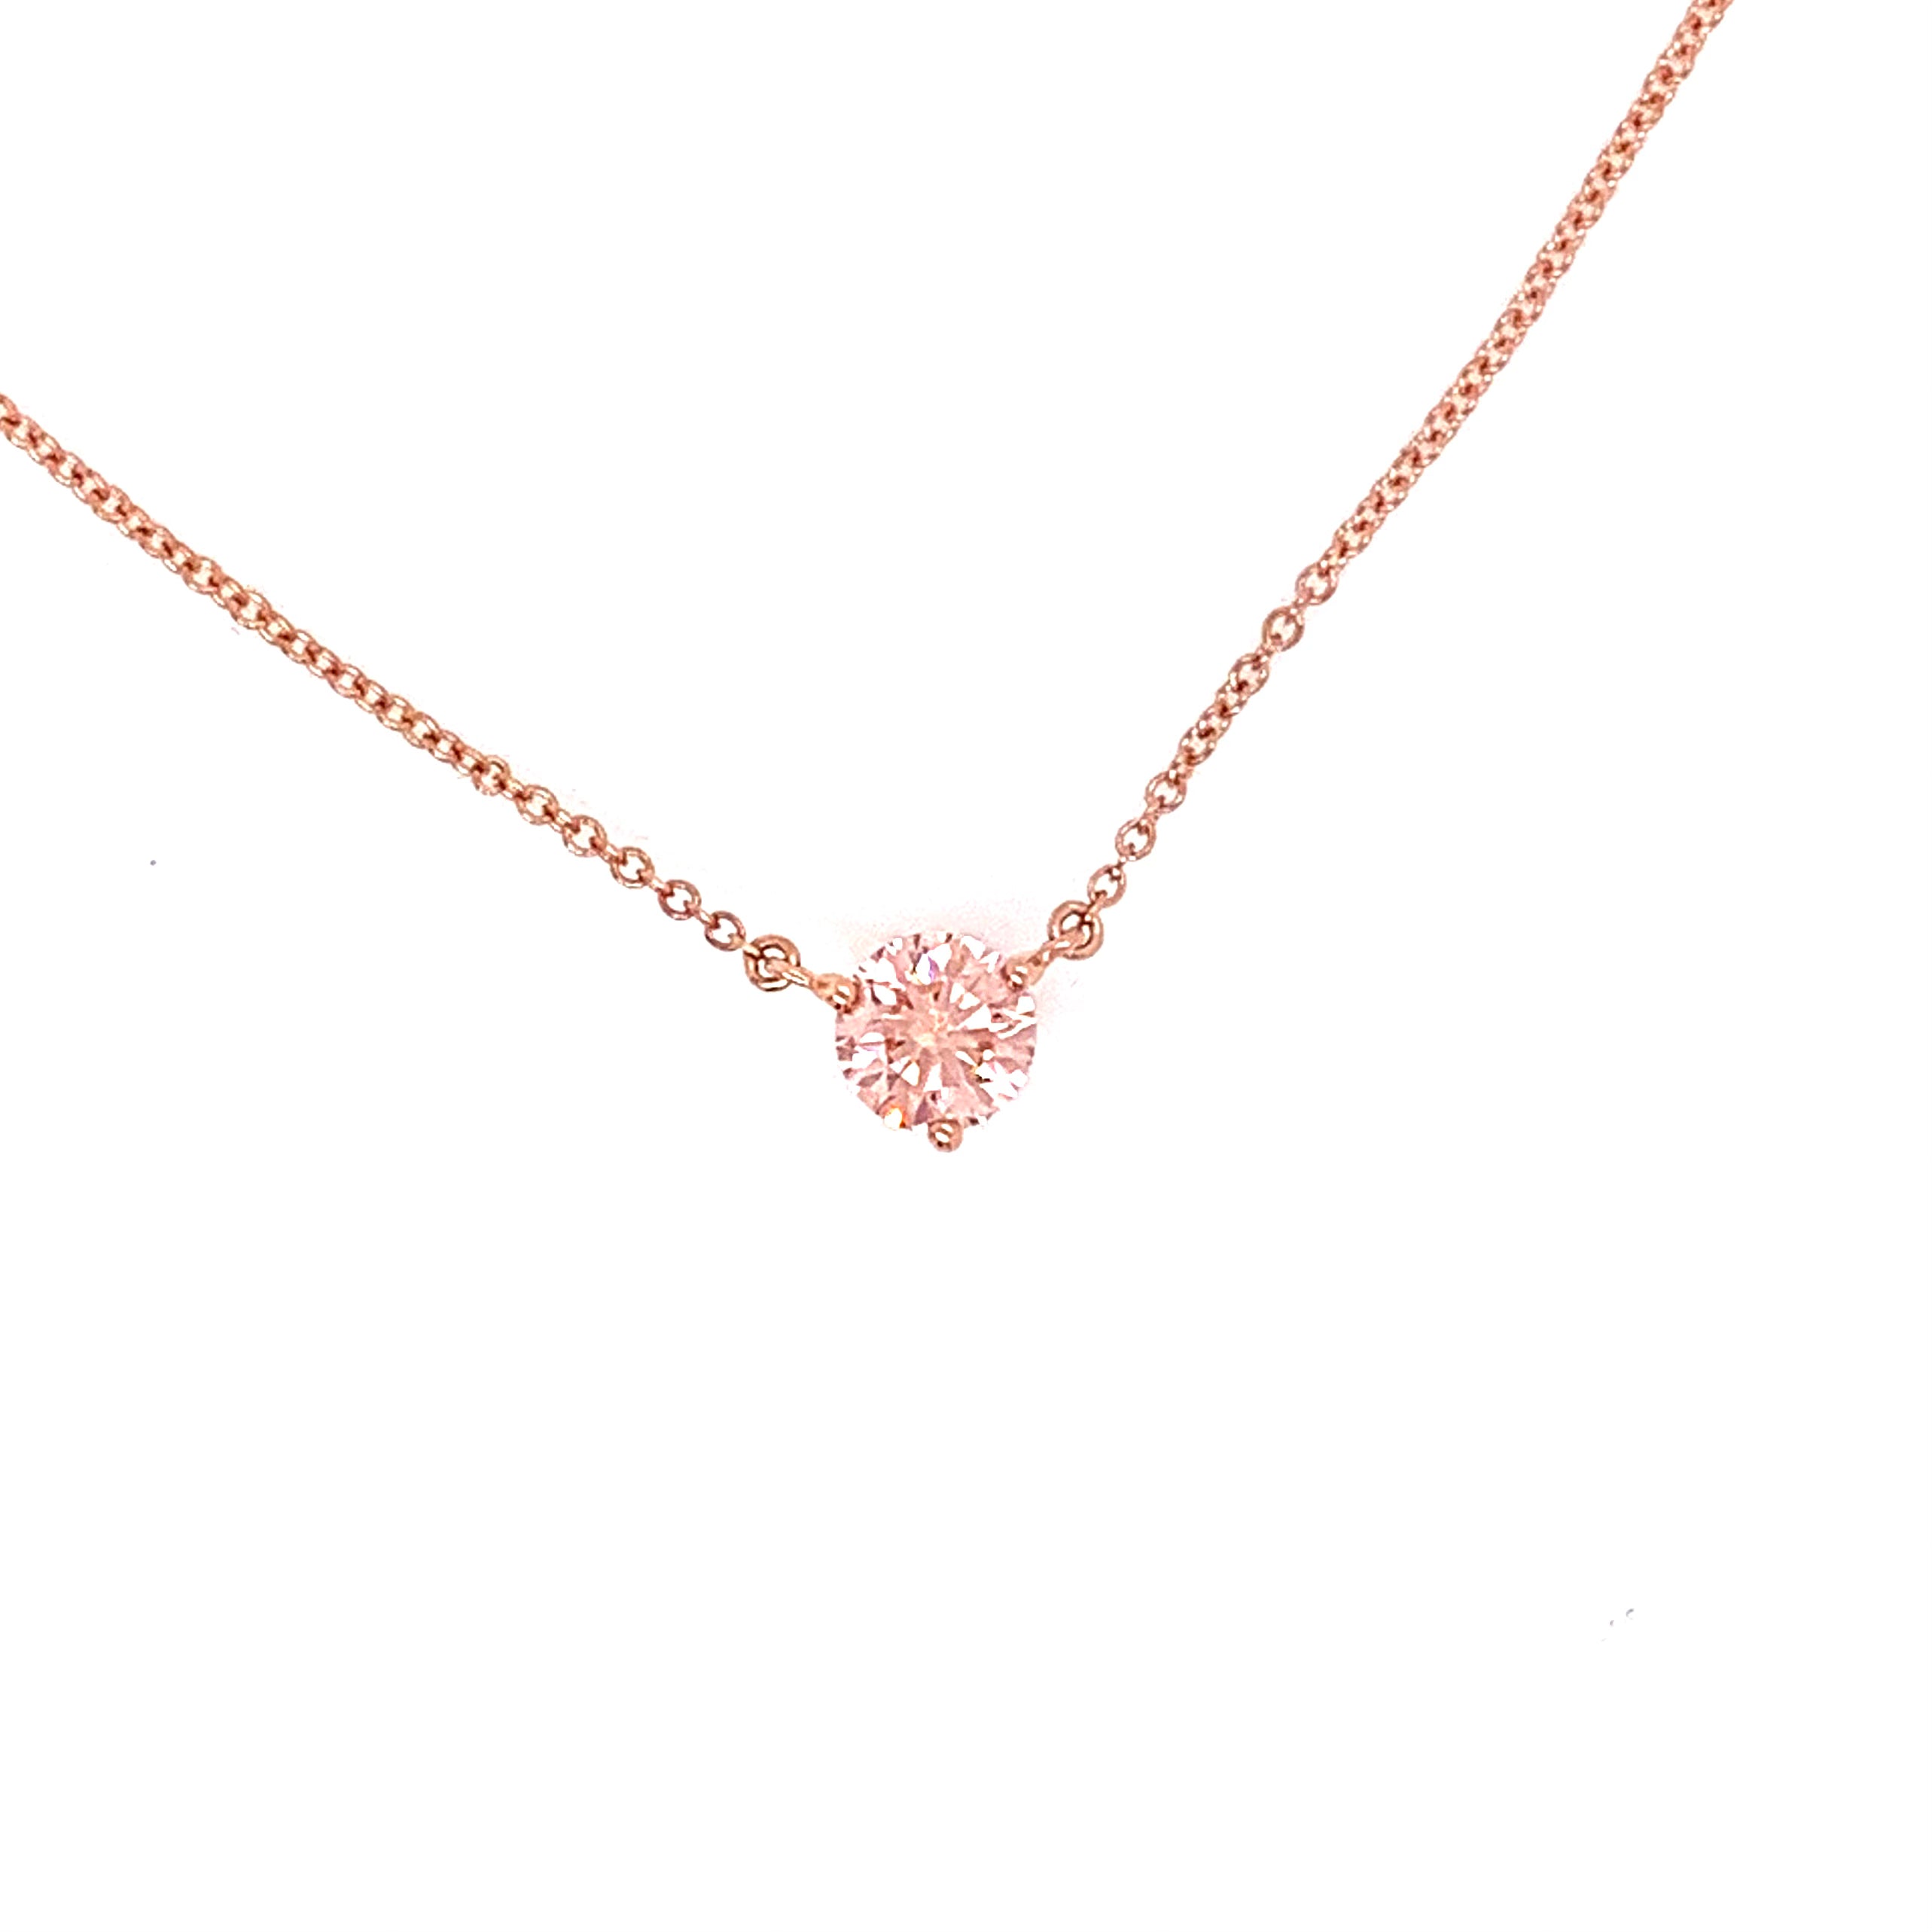 Lightbox Jewelry 10KR Solitaire Pendant 1/2ct Pink LGD